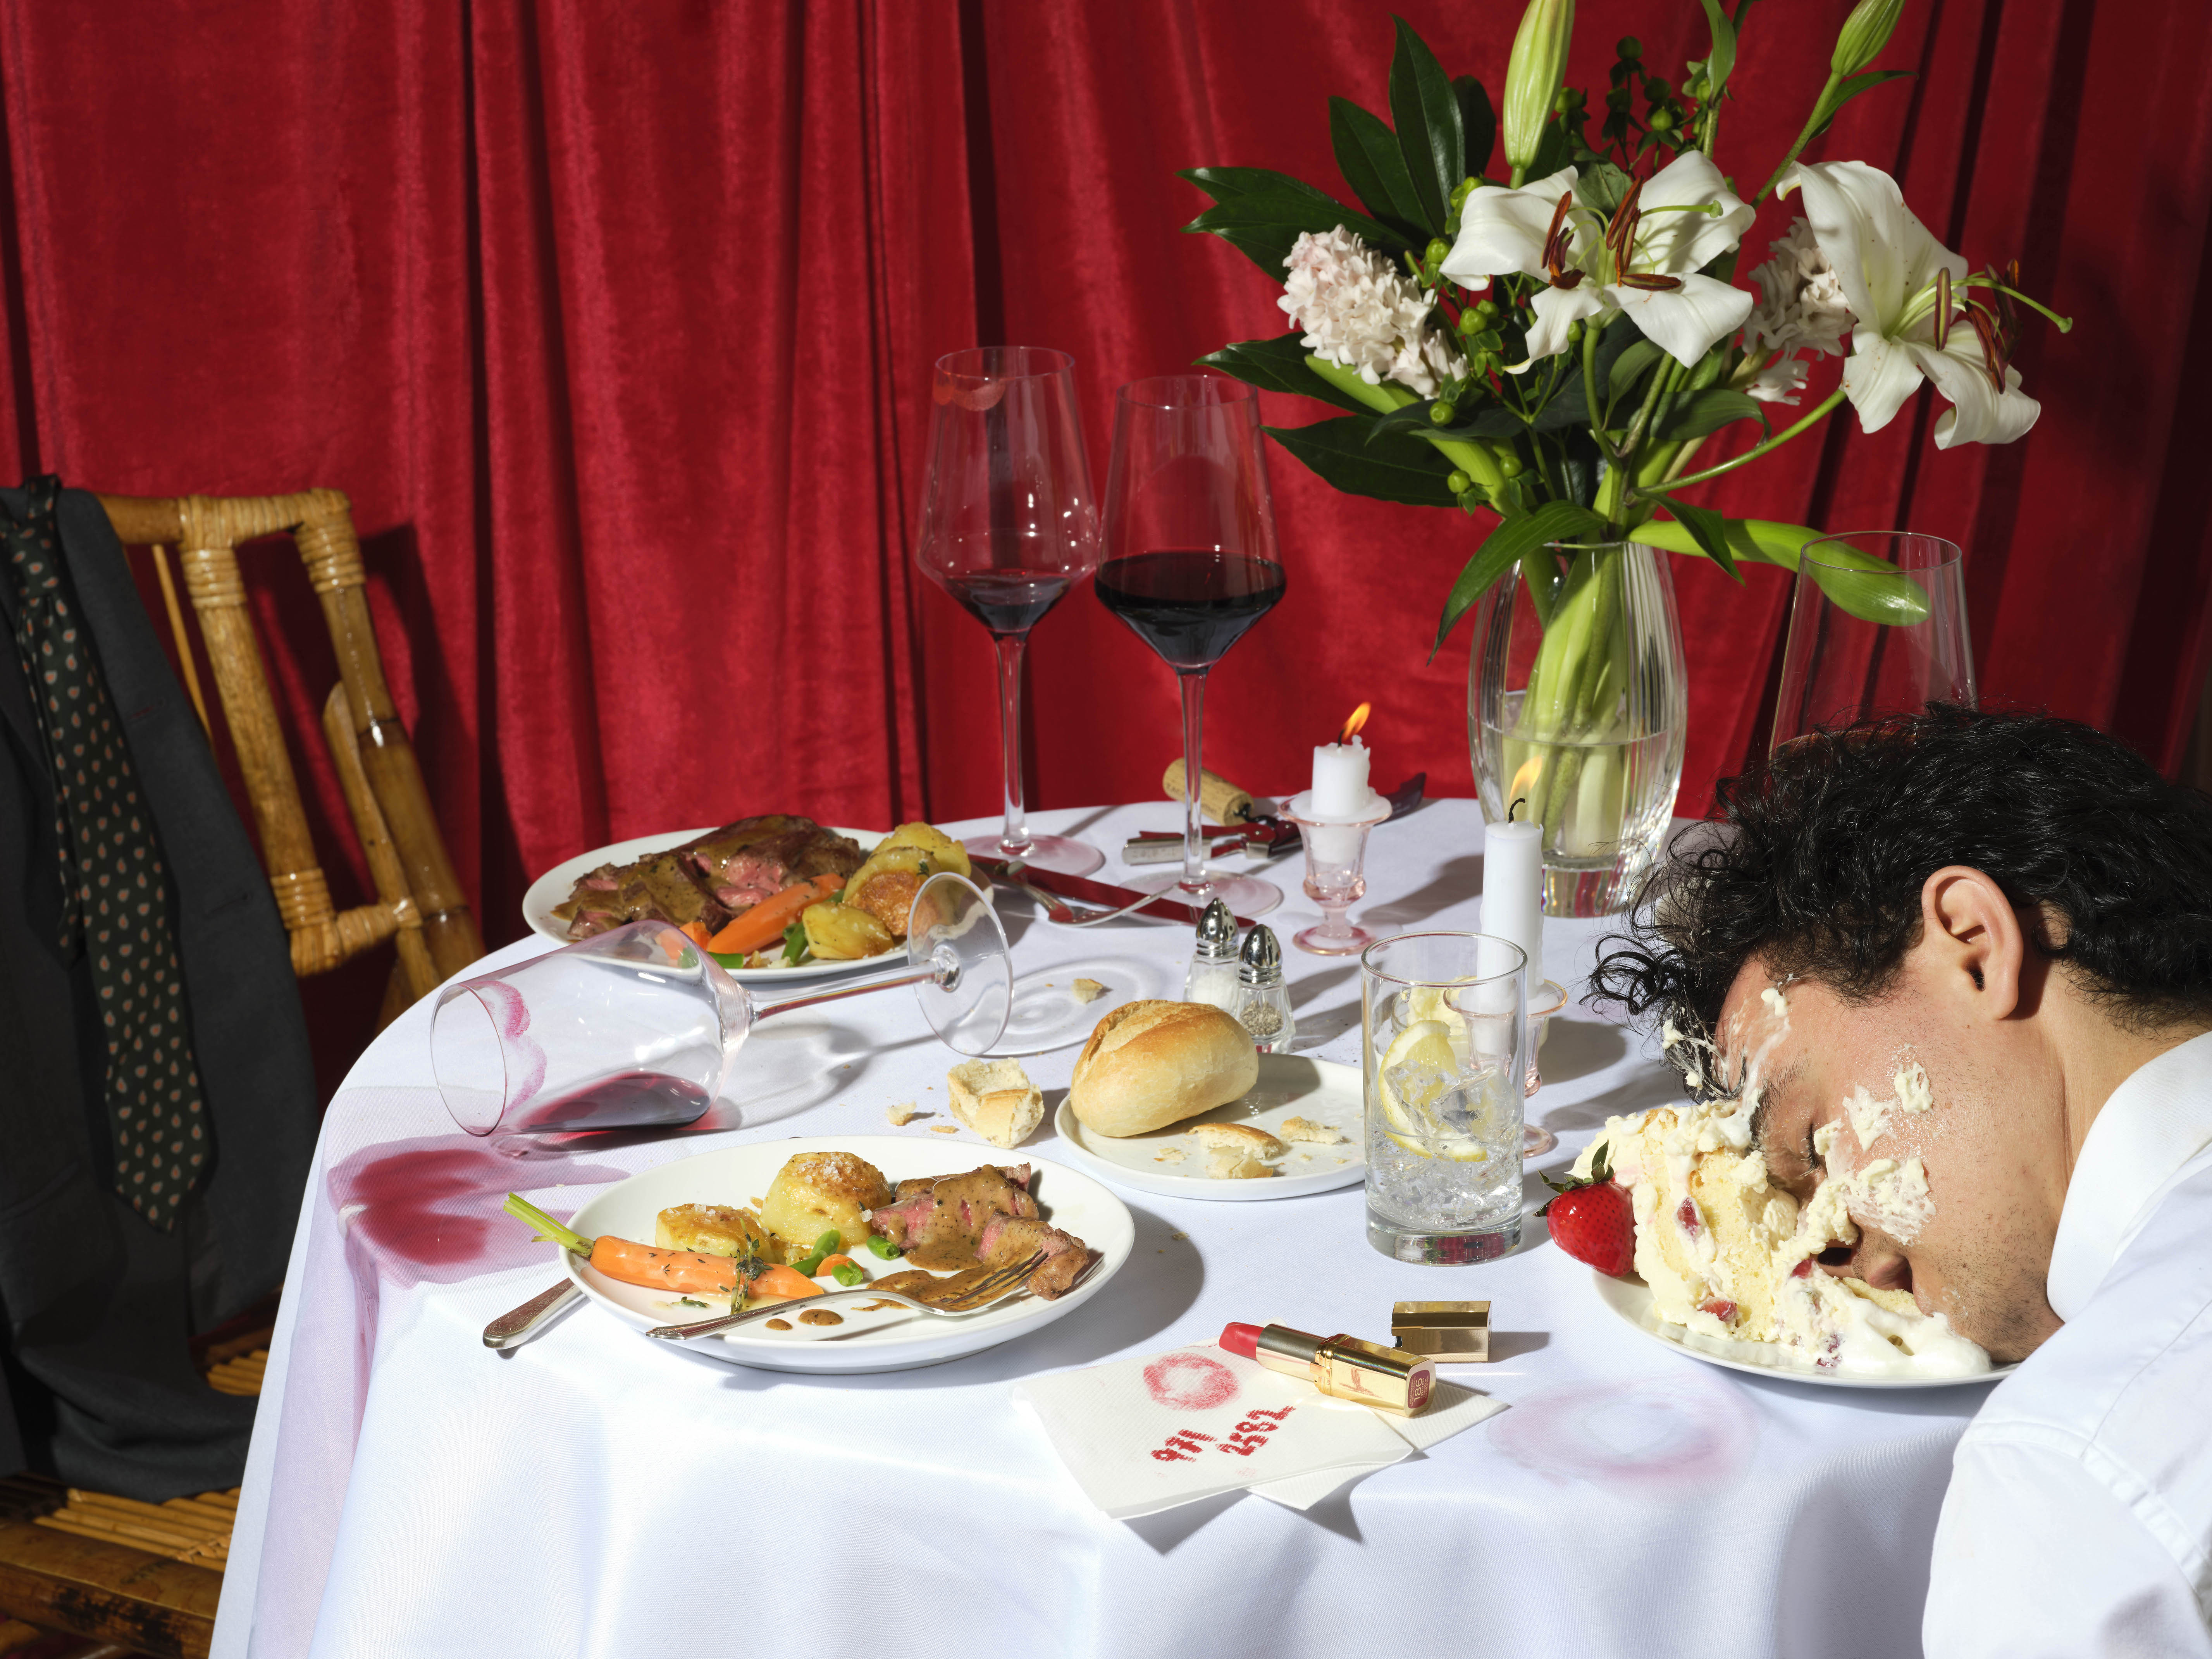 A table in the aftermath of a wedding party; there is spilled wine, half eaten plates of food, and a guess passed out in a slice of cake.